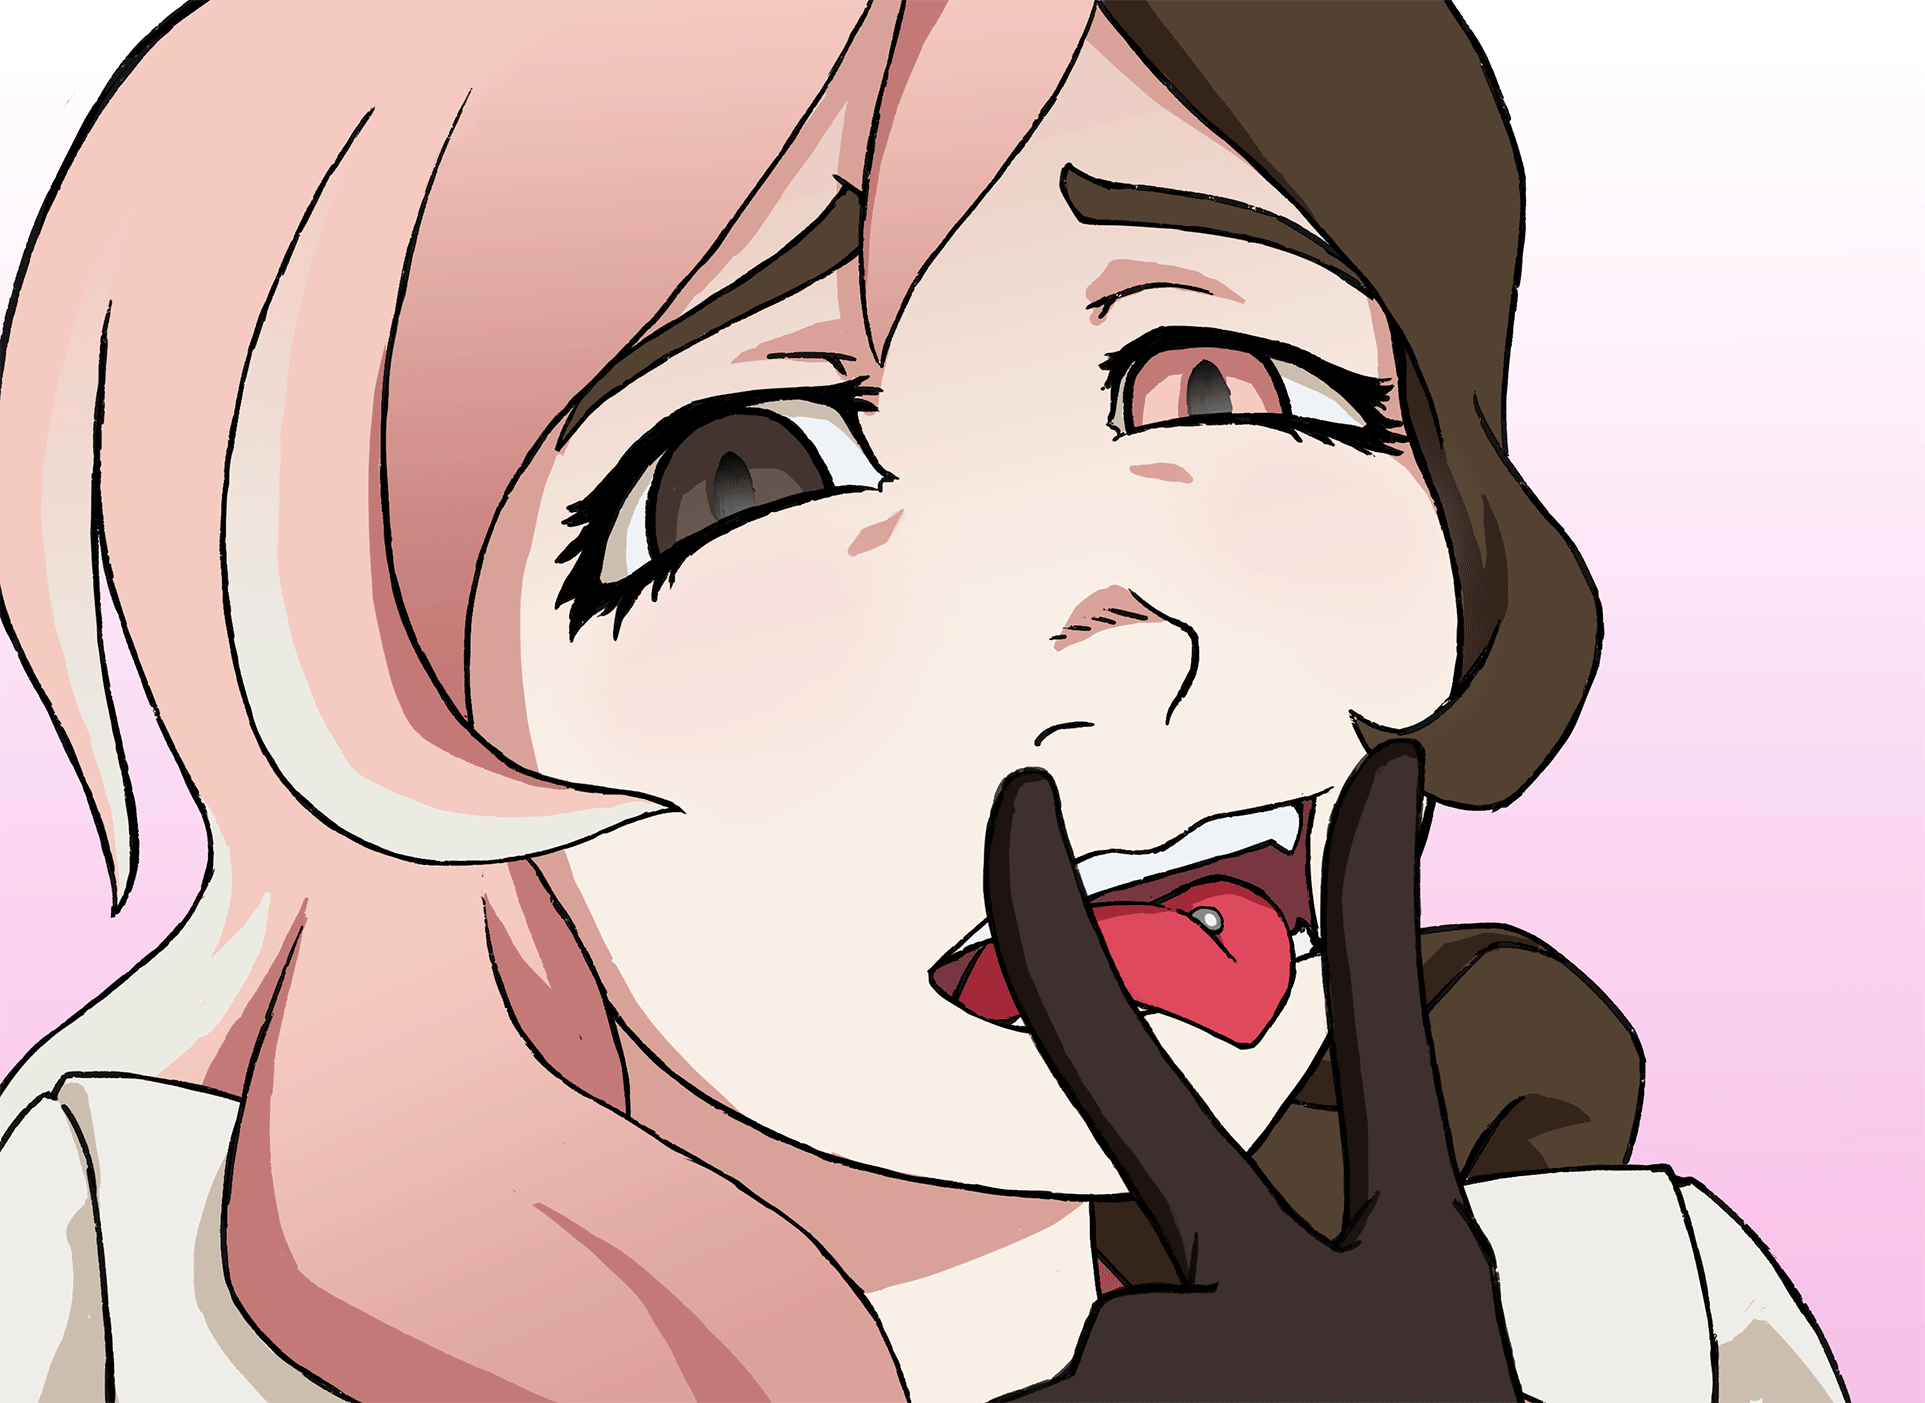 RWBY/RT General #2069: Neo is Cute! 